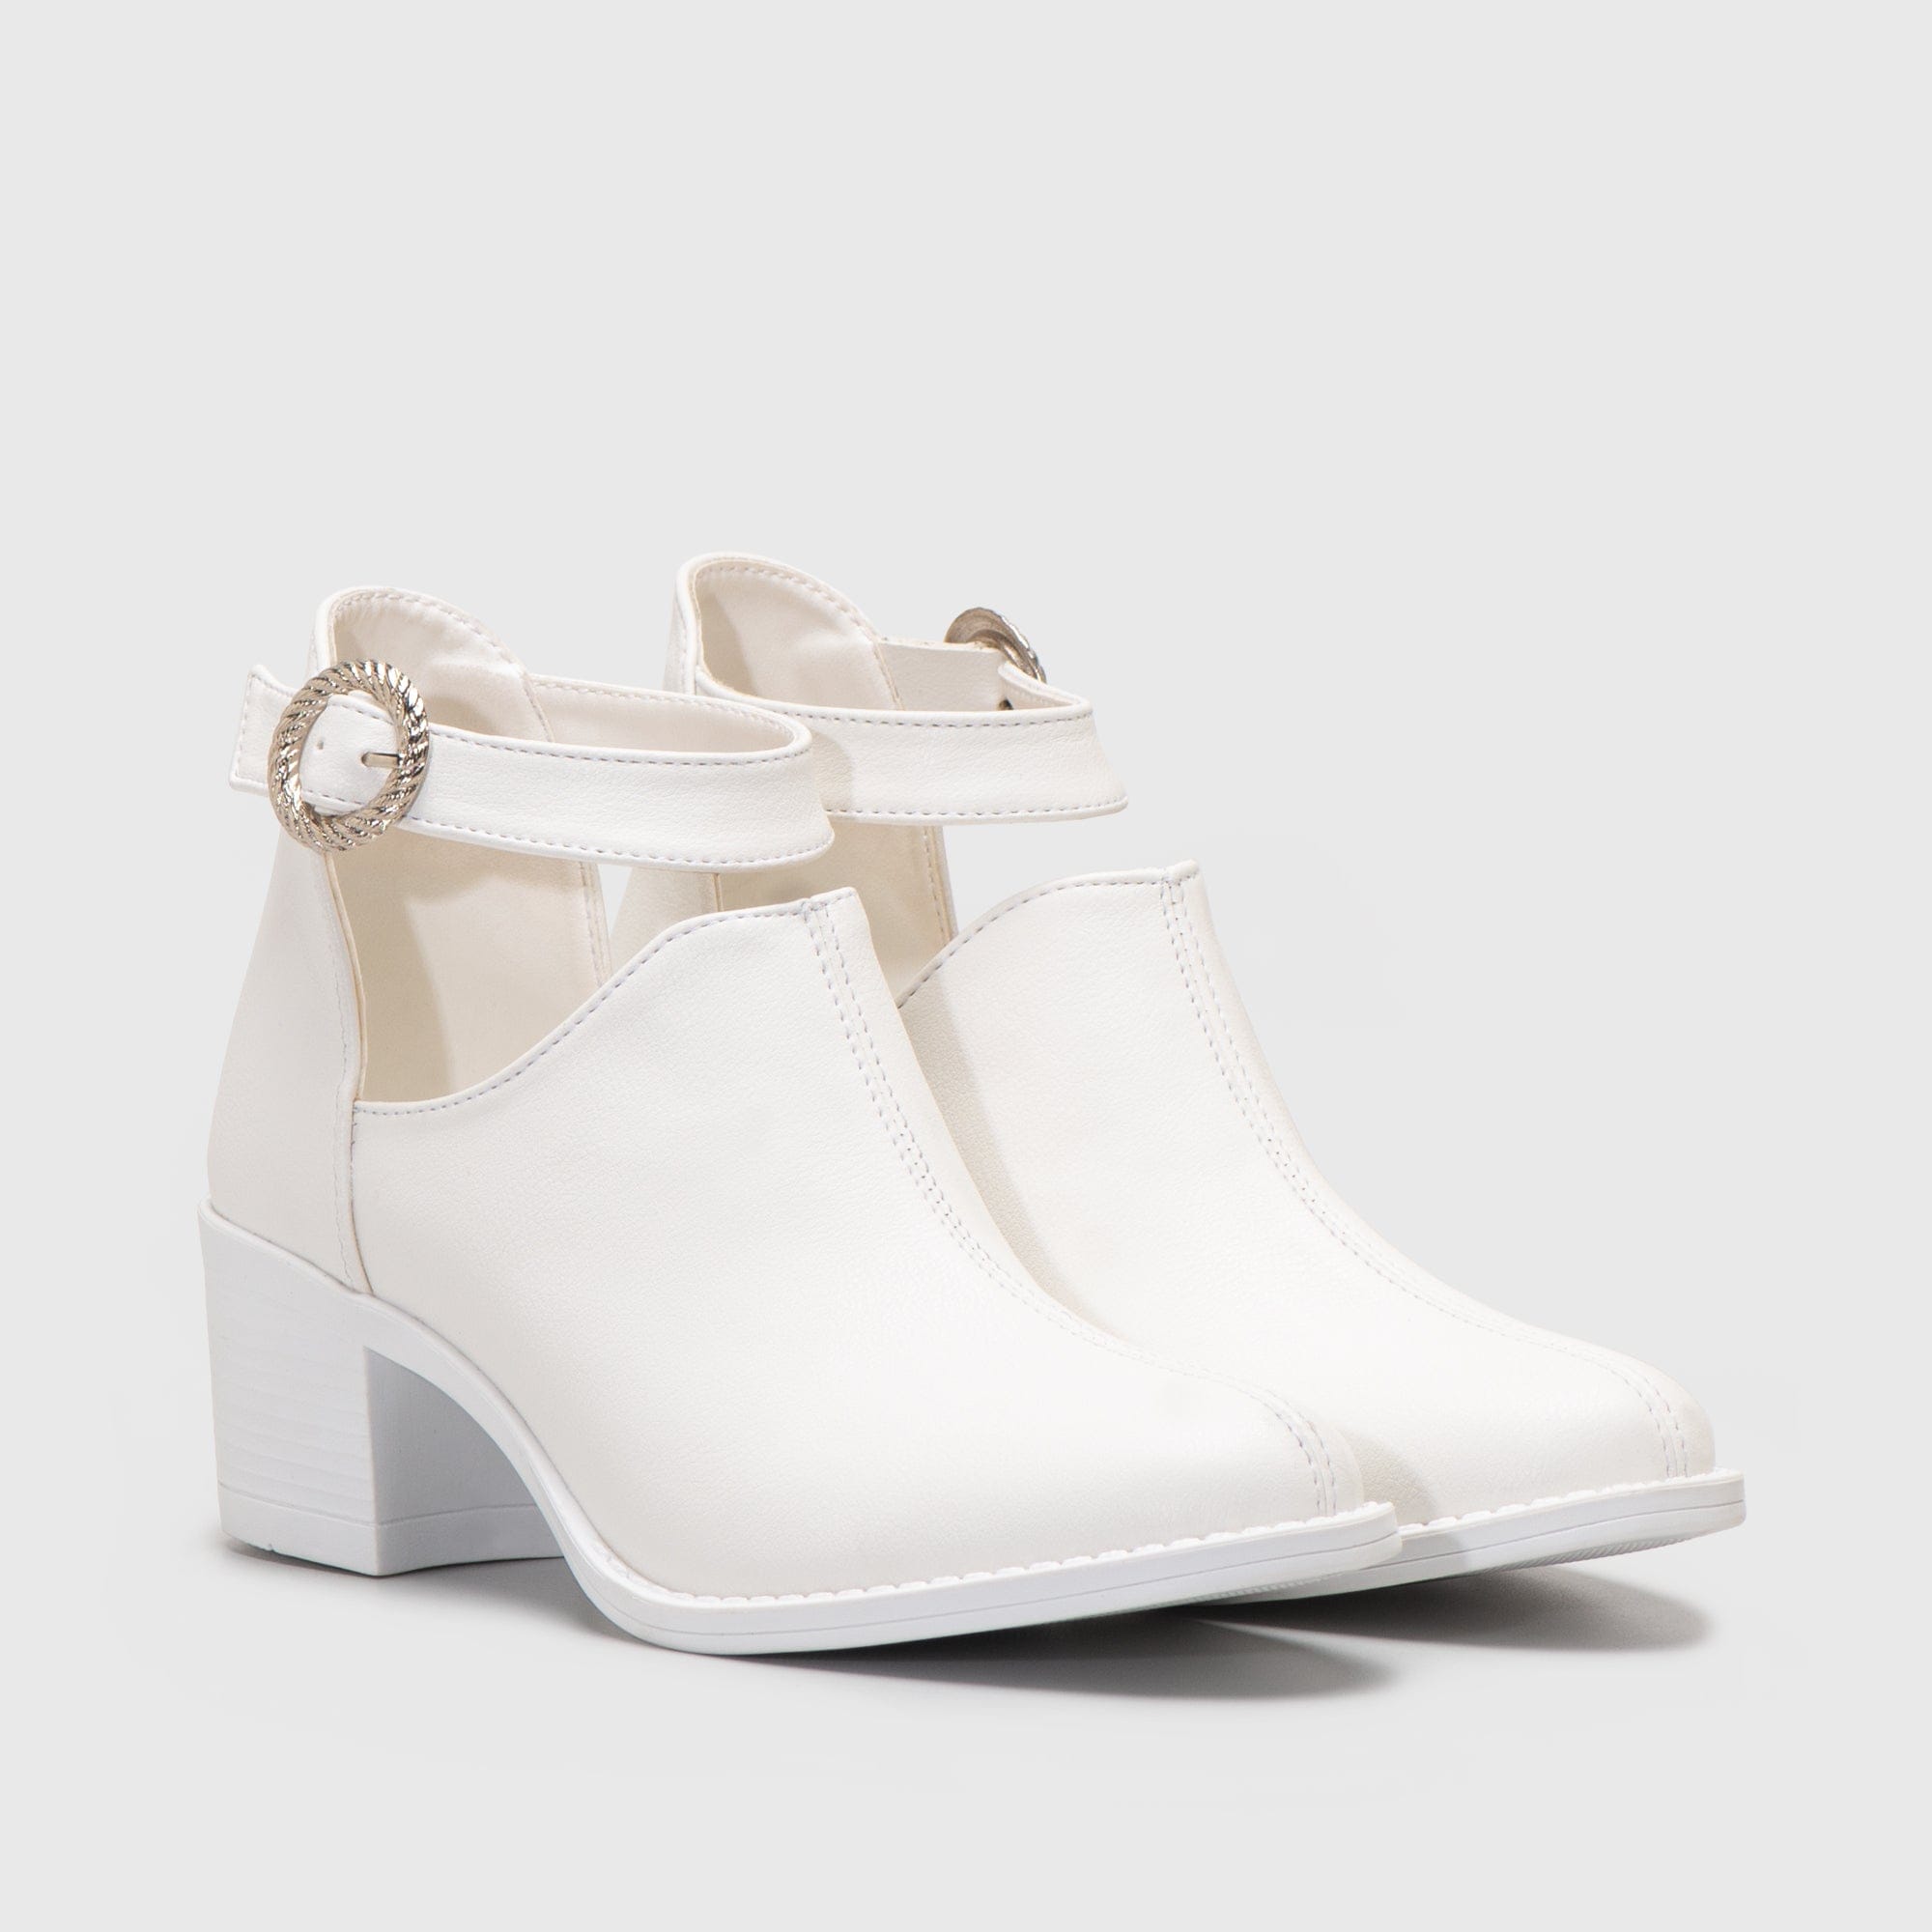 Adorable Projects Official Boots 42 / White Lodka Boots White Heels